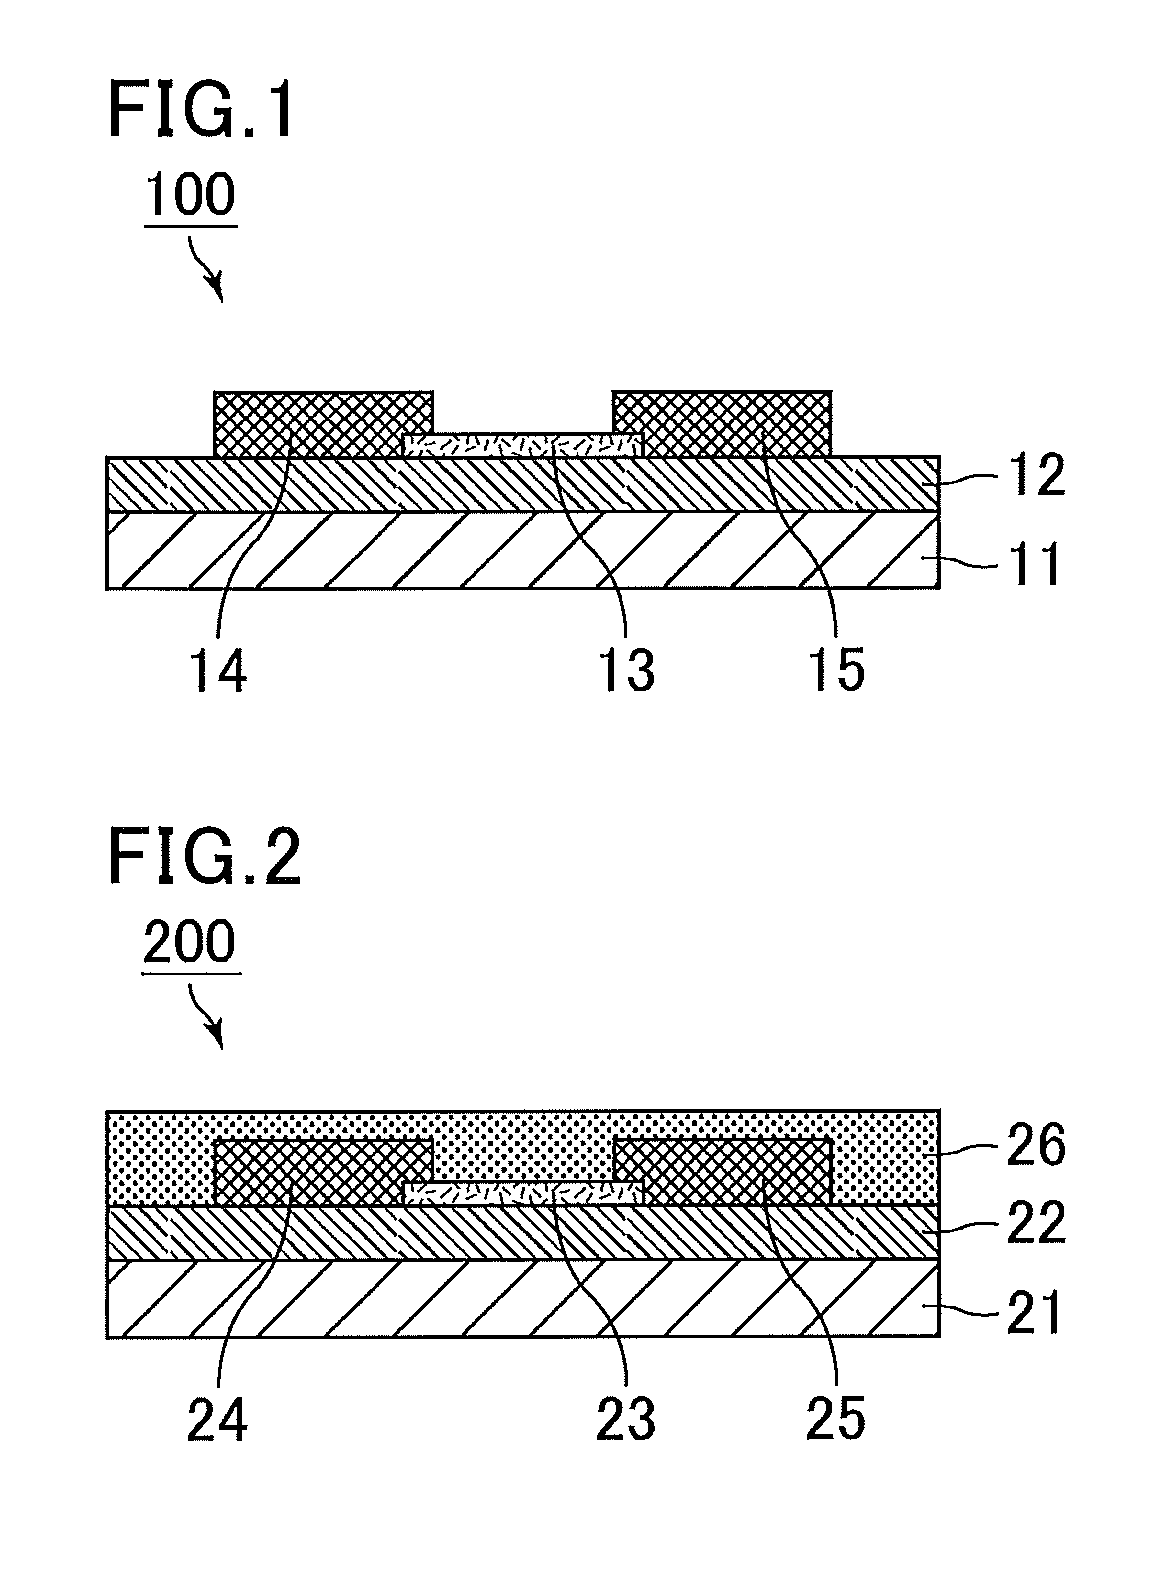 Positive photosensitive composition, thin film transistor, and compound